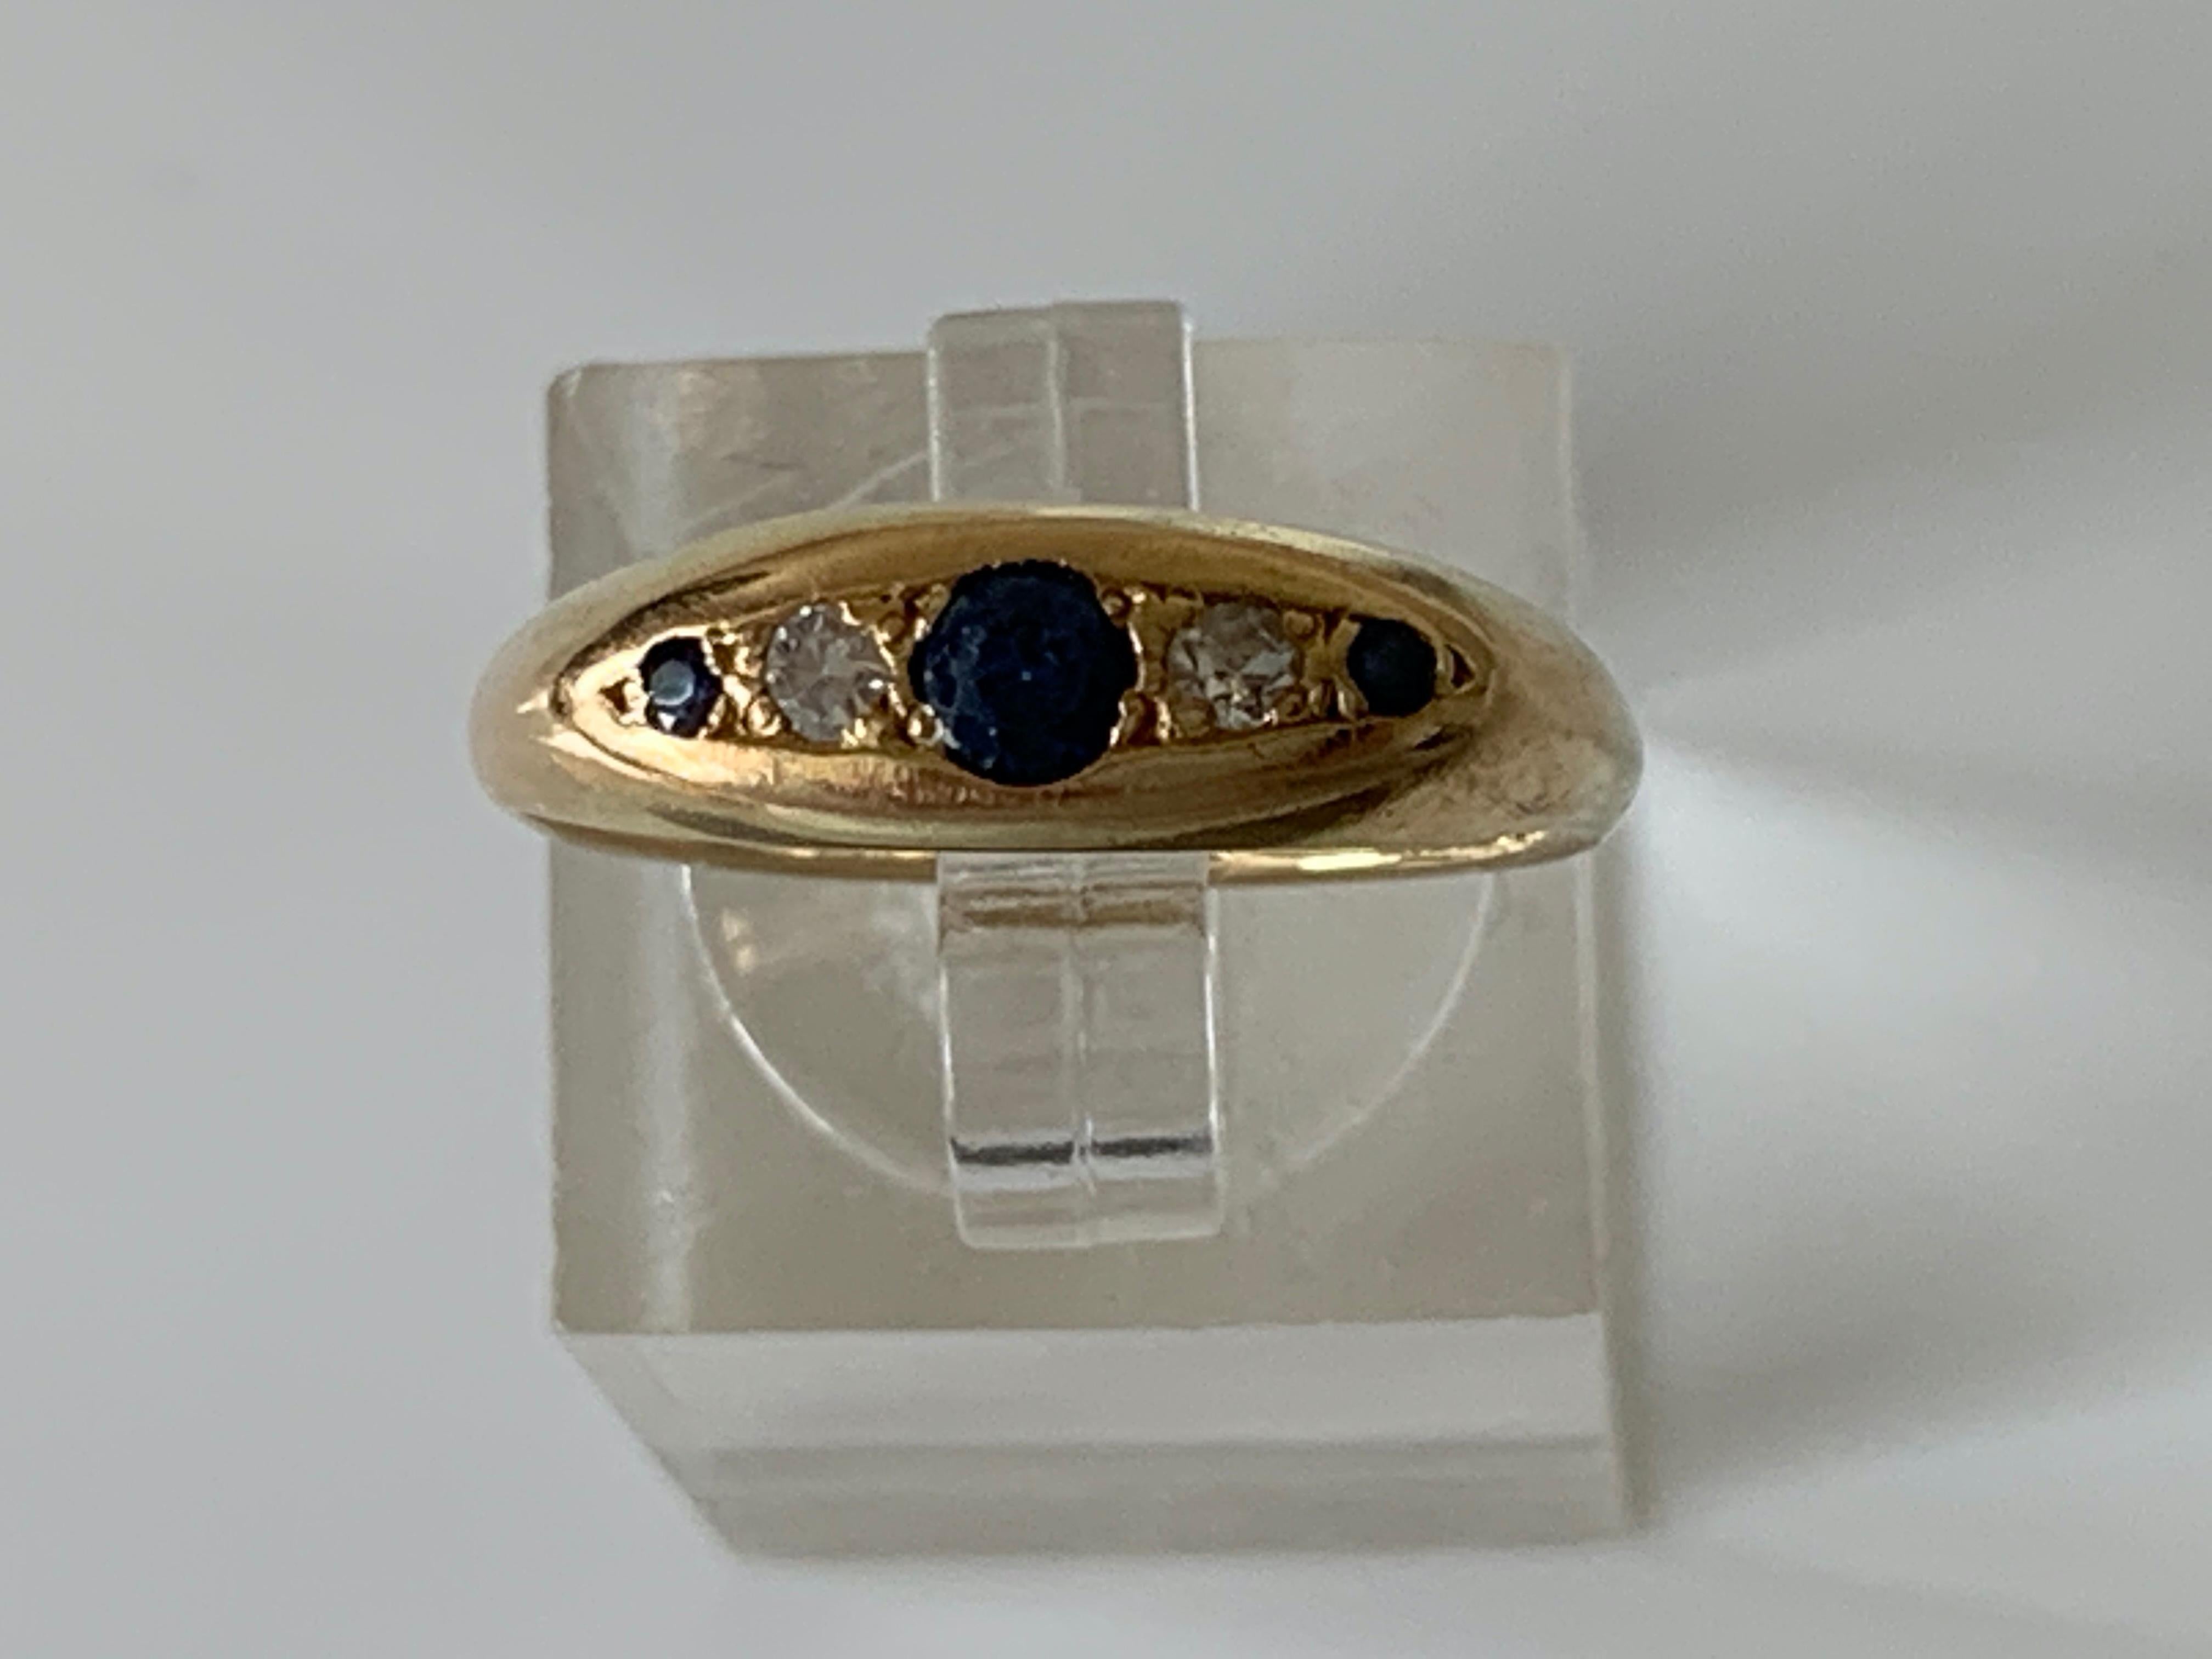 Antique 18ct Gold Ring
Dark Blue Sapphires - 0.13 Carat in total
main sapphire 0.10 Carat 
with two Diamonds either side - 0.06 carat
Stamped 18ct 
U.K Size P 1/2
U.S Size 7 3/4